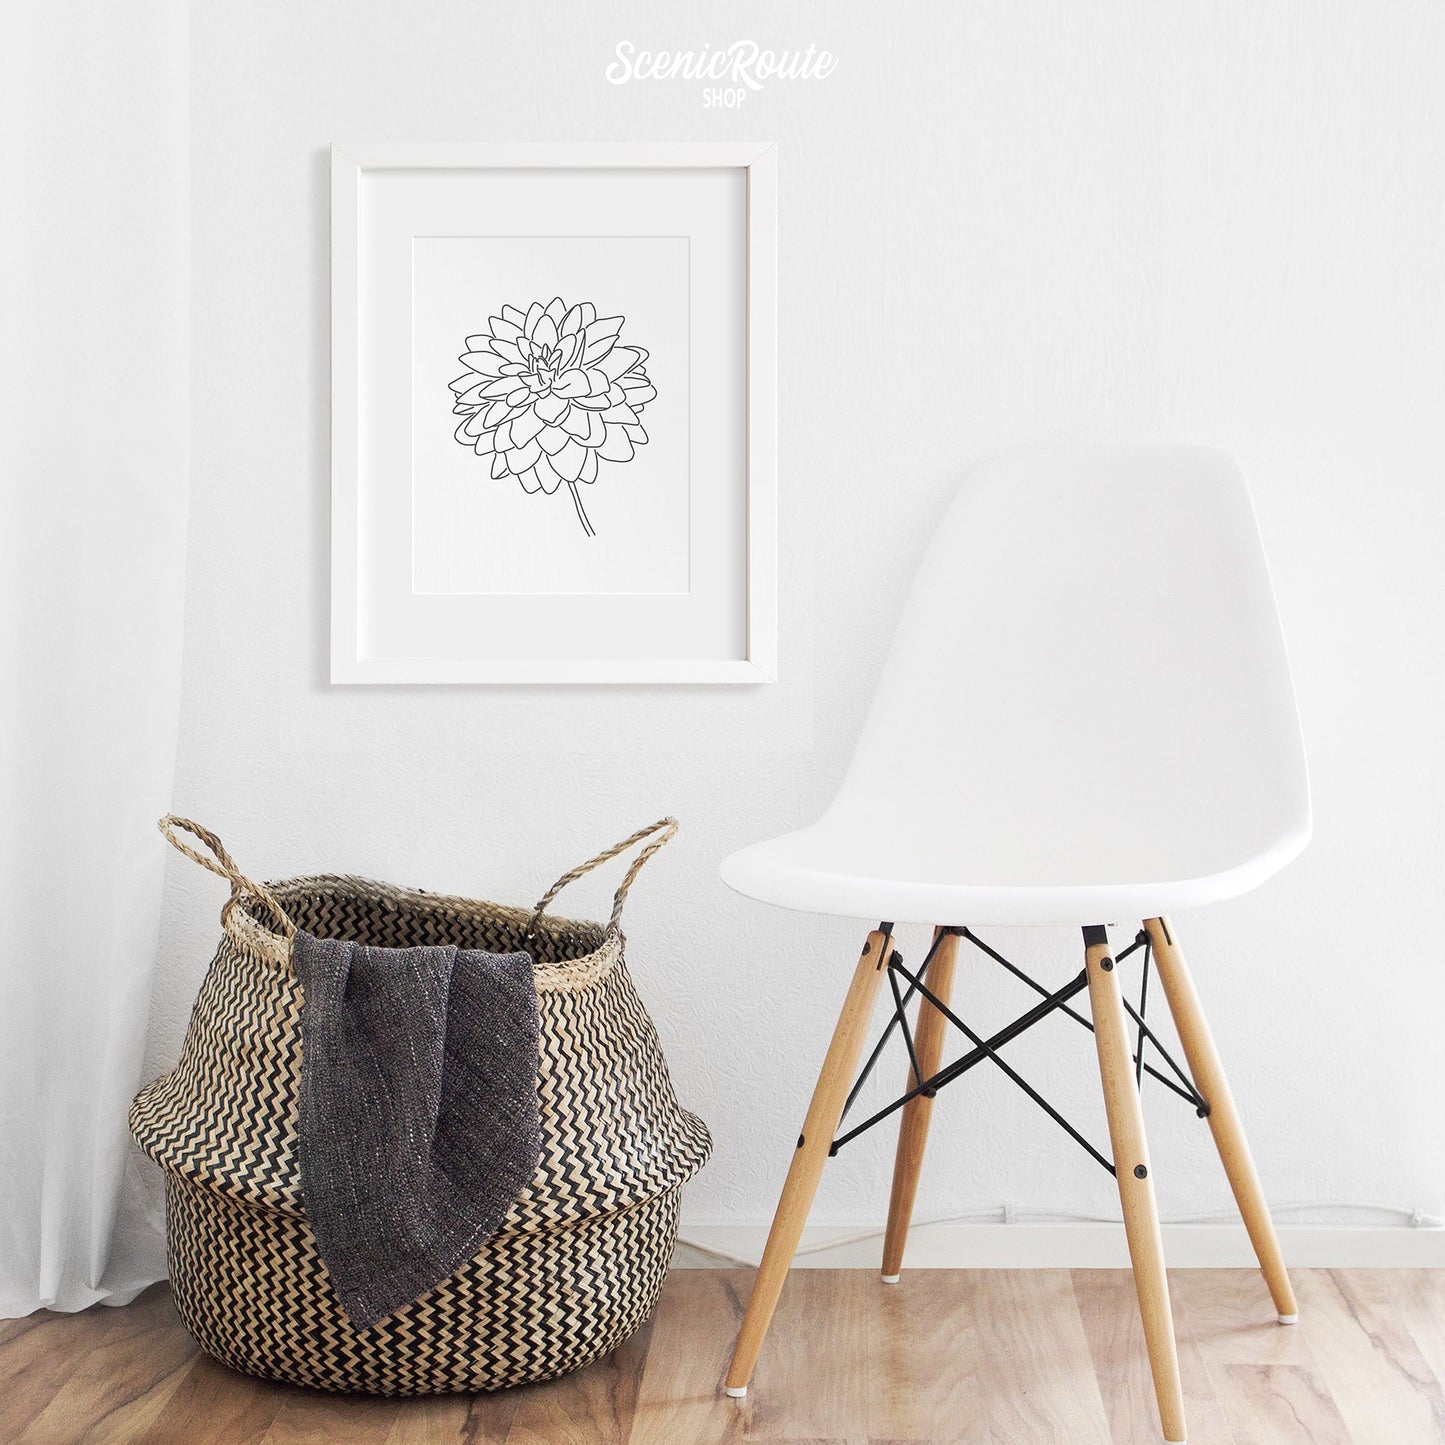 A framed line art drawing of a Dahlia Flower above a basket and chair